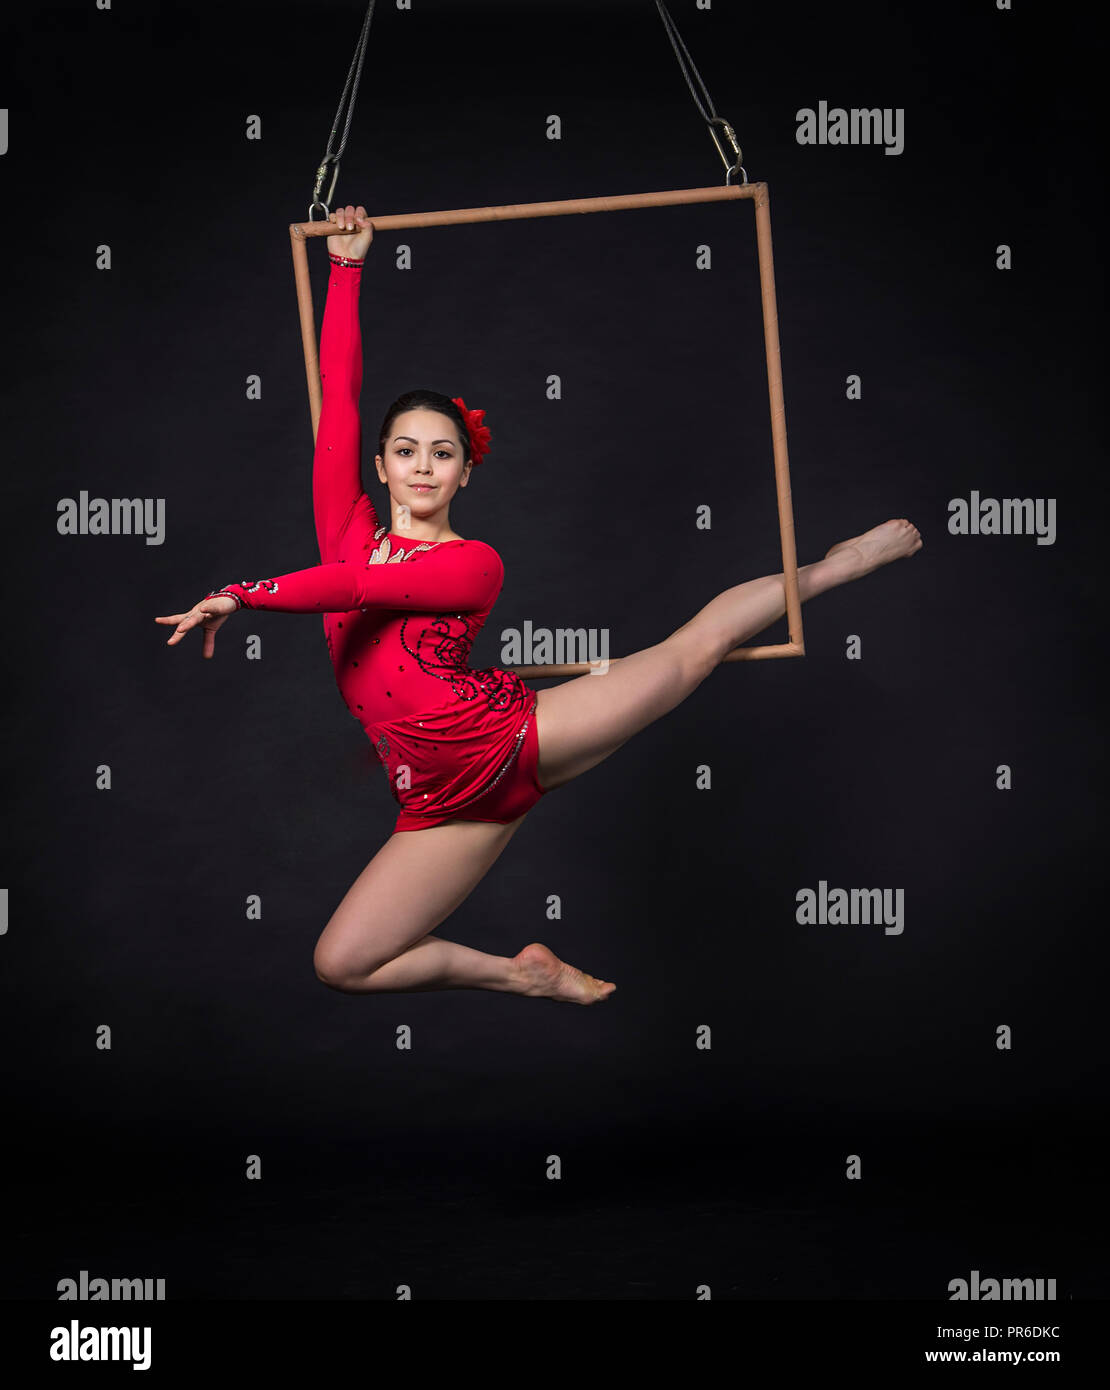 A young woman performs the acrobatic elements in the air trapeze. Studio shooting performances on a black background. Stock Photo